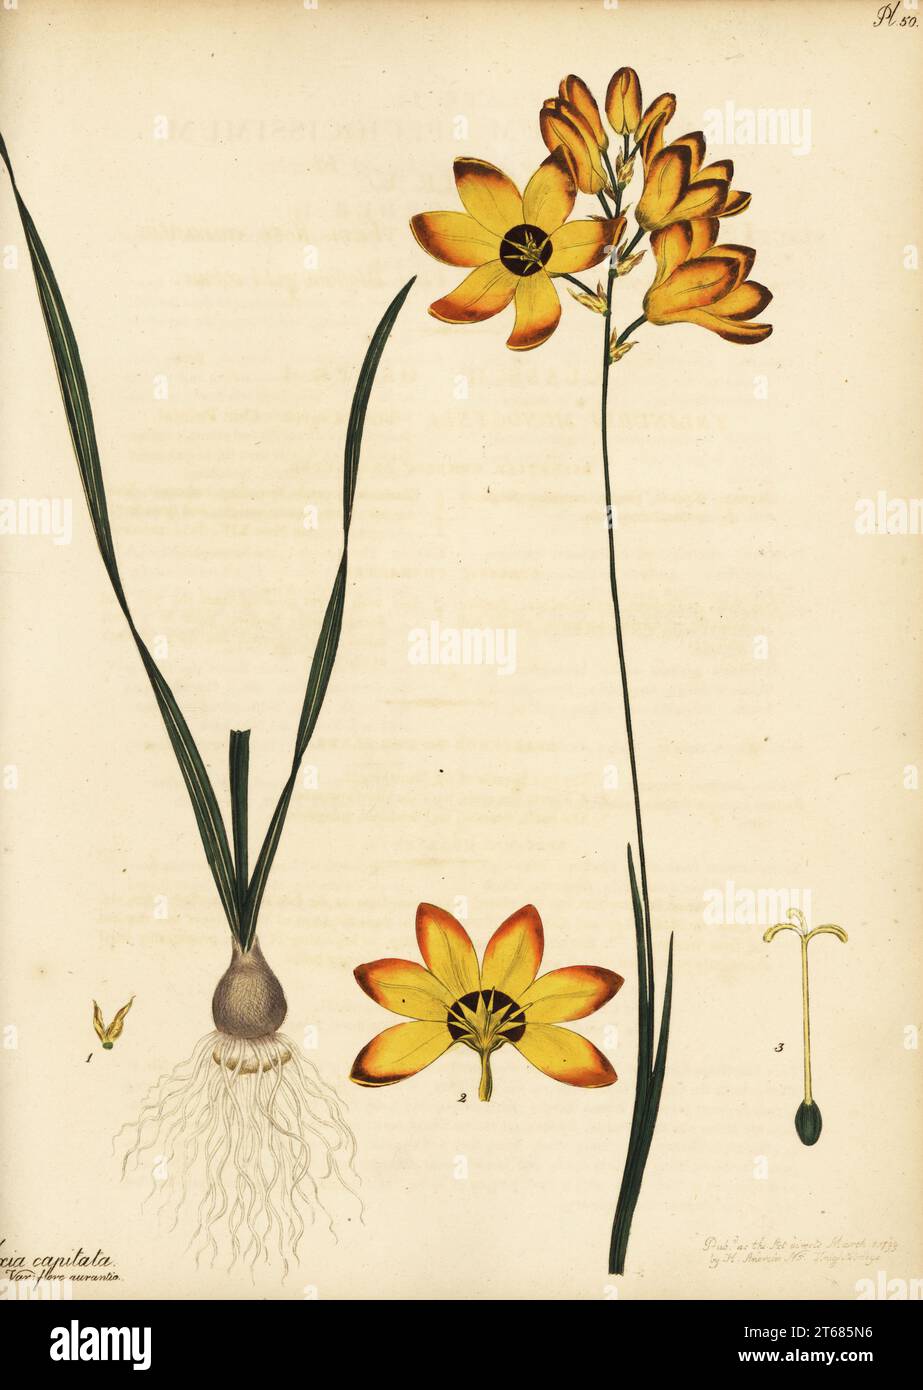 Spotted African corn lily, Ixia maculata. Frieskalossie, South Africa. Bunch-flowering ixia, var. blossom gold colour, Ixia capitata var. flore aurantia. Copperplate engraving drawn, engraved and hand-coloured by Henry Andrews from his Botanical Register, Volume 1, published in London, 1799. Stock Photo